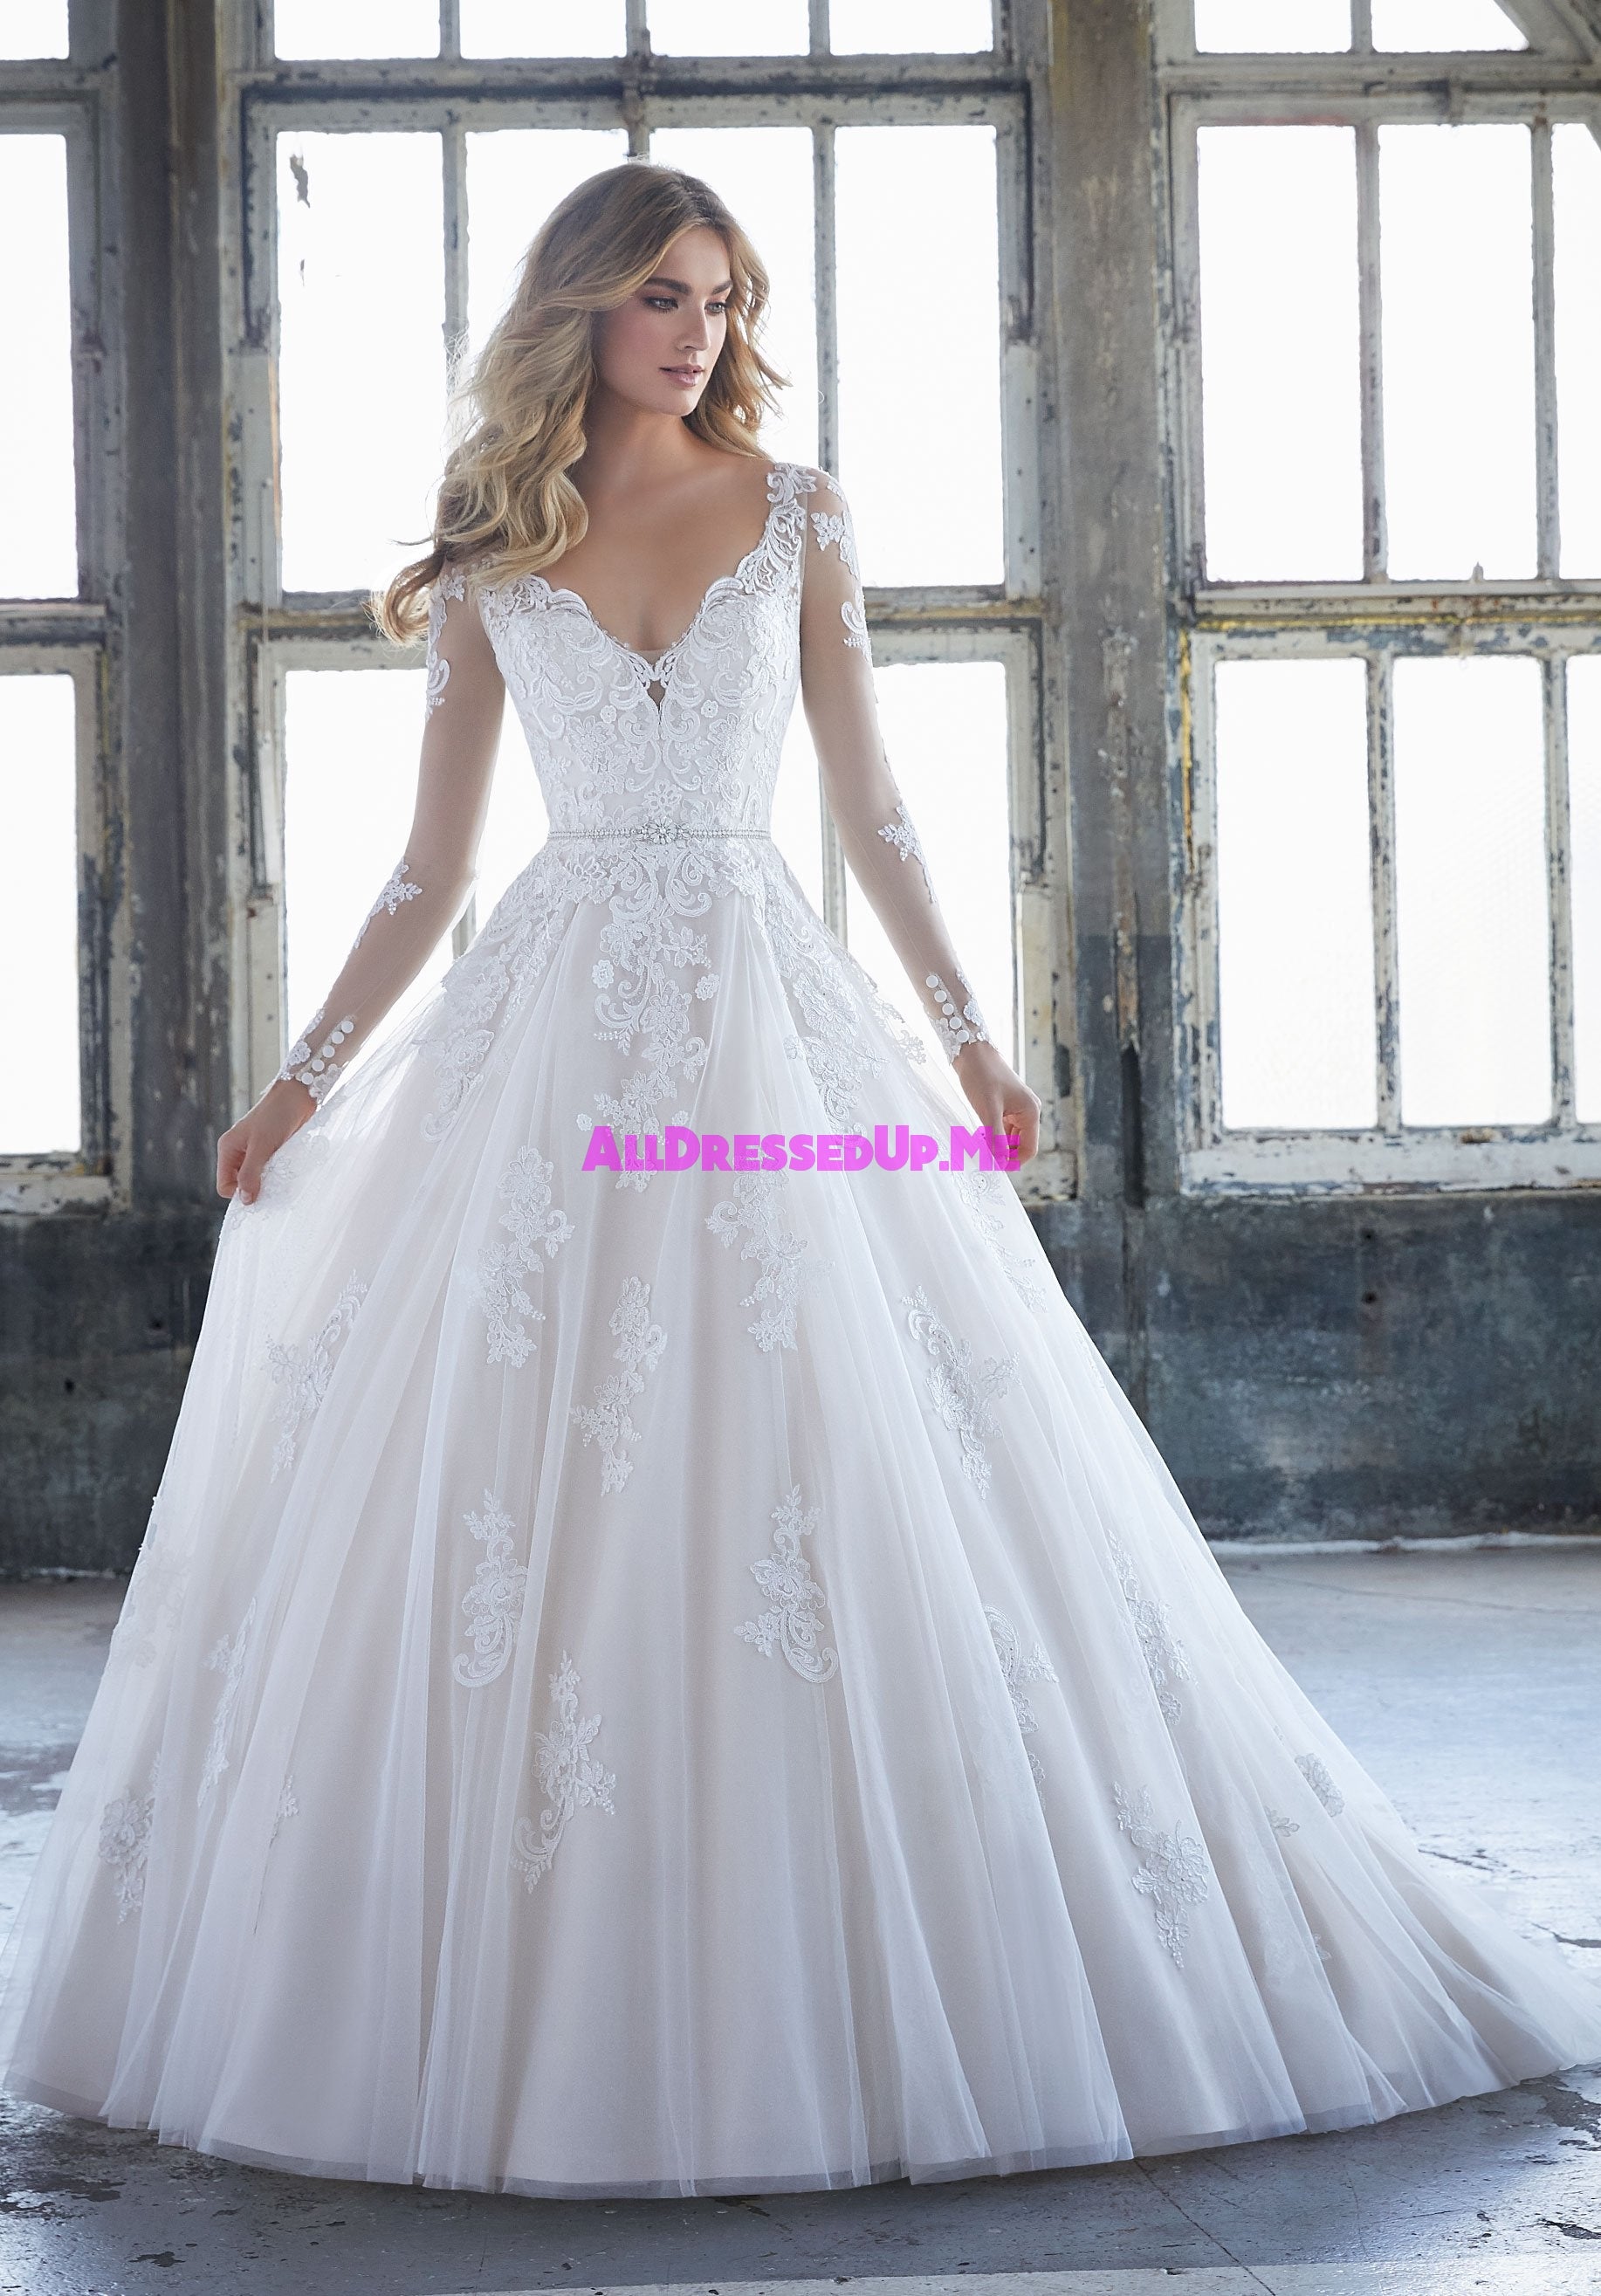 Morilee - 8225 - Katherine - Cheron's Bridal, Wedding Gown - Morilee Line - - Wedding Gowns Dresses Chattanooga Hixson Shops Boutiques Tennessee TN Georgia GA MSRP Lowest Prices Sale Discount